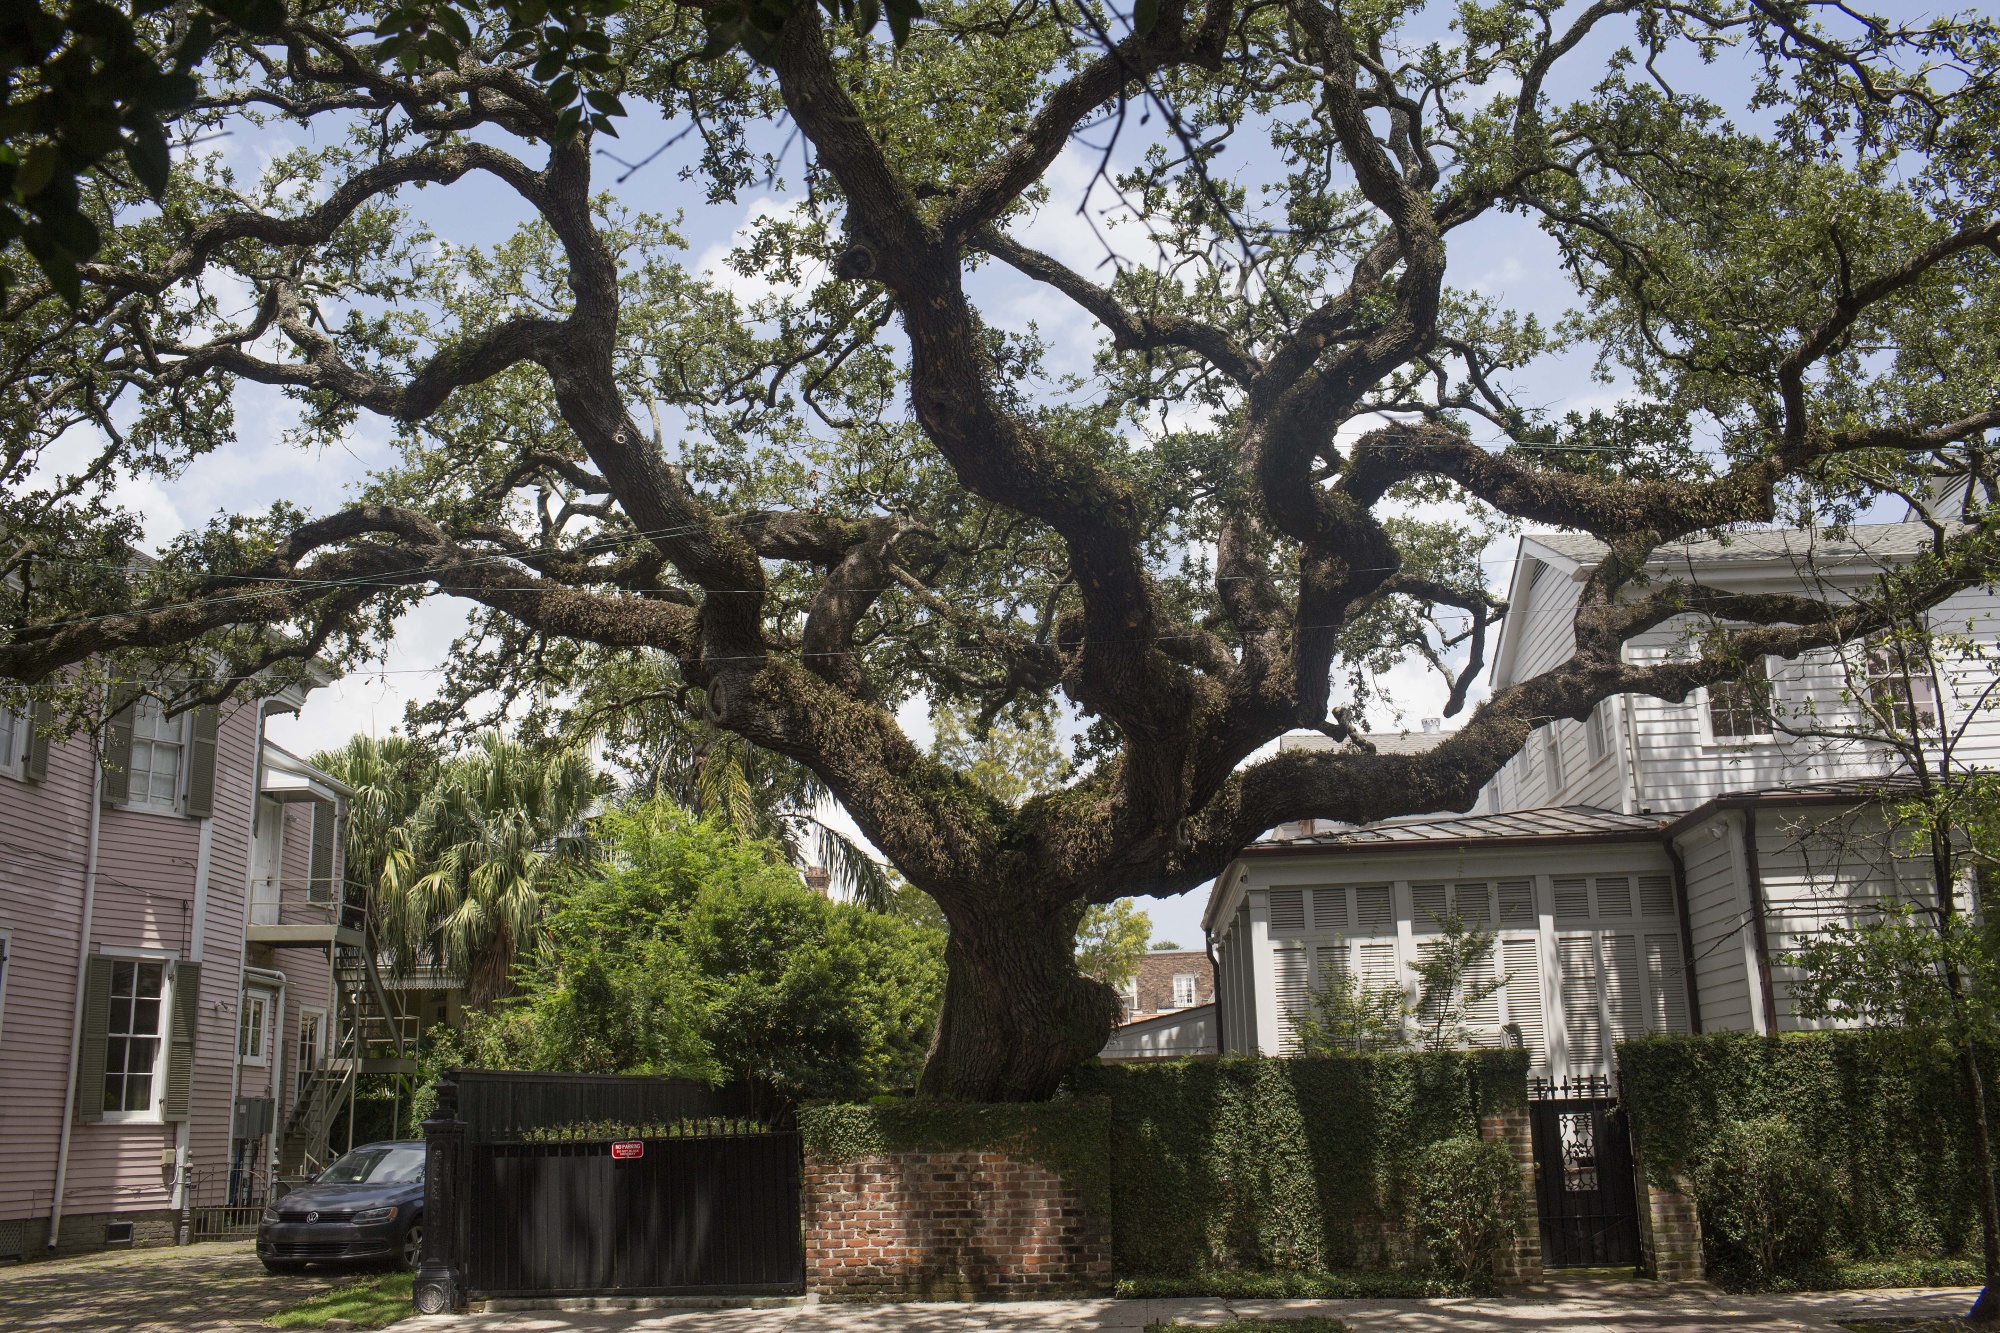 While huge live oak&nbsp;trees are a fixture of New Orleans neighborhoods like&nbsp;the Garden District, the city’s overall tree canopy has been in decline.&nbsp;